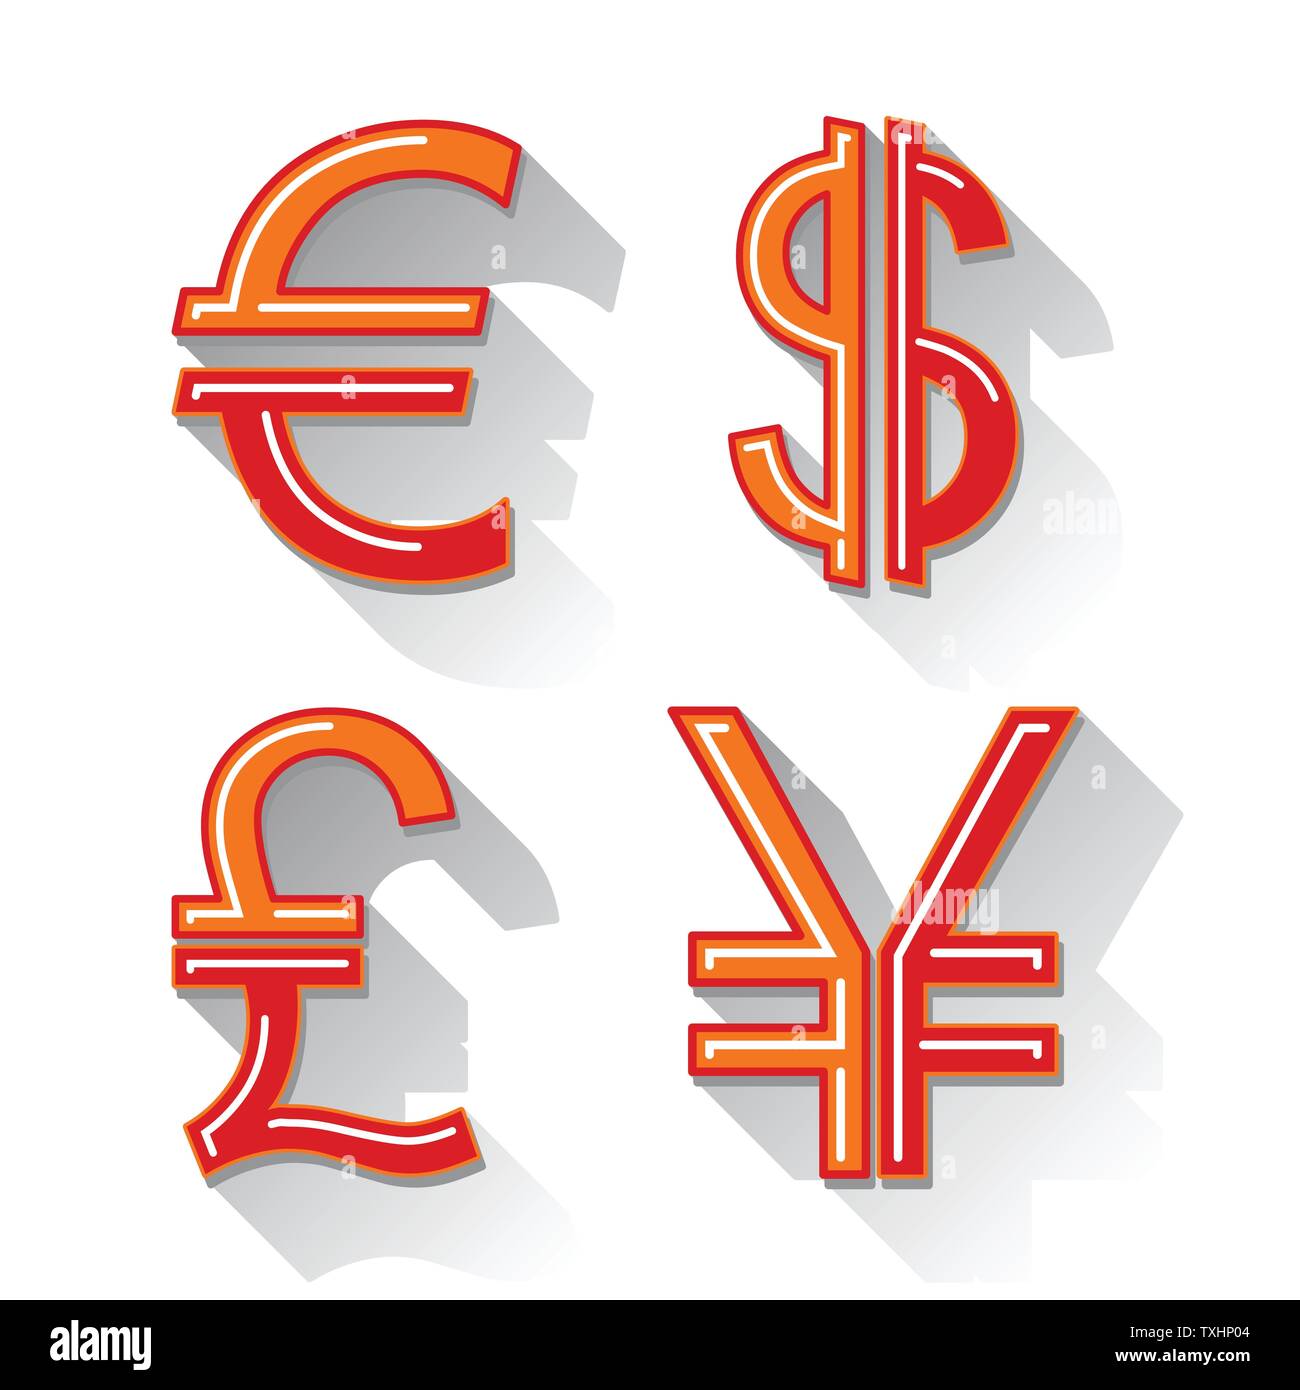 Dollar, Euro, Pound and Yen currency icons. USD, EUR, GBP and JPY money sign symbols, vector Stock Vector